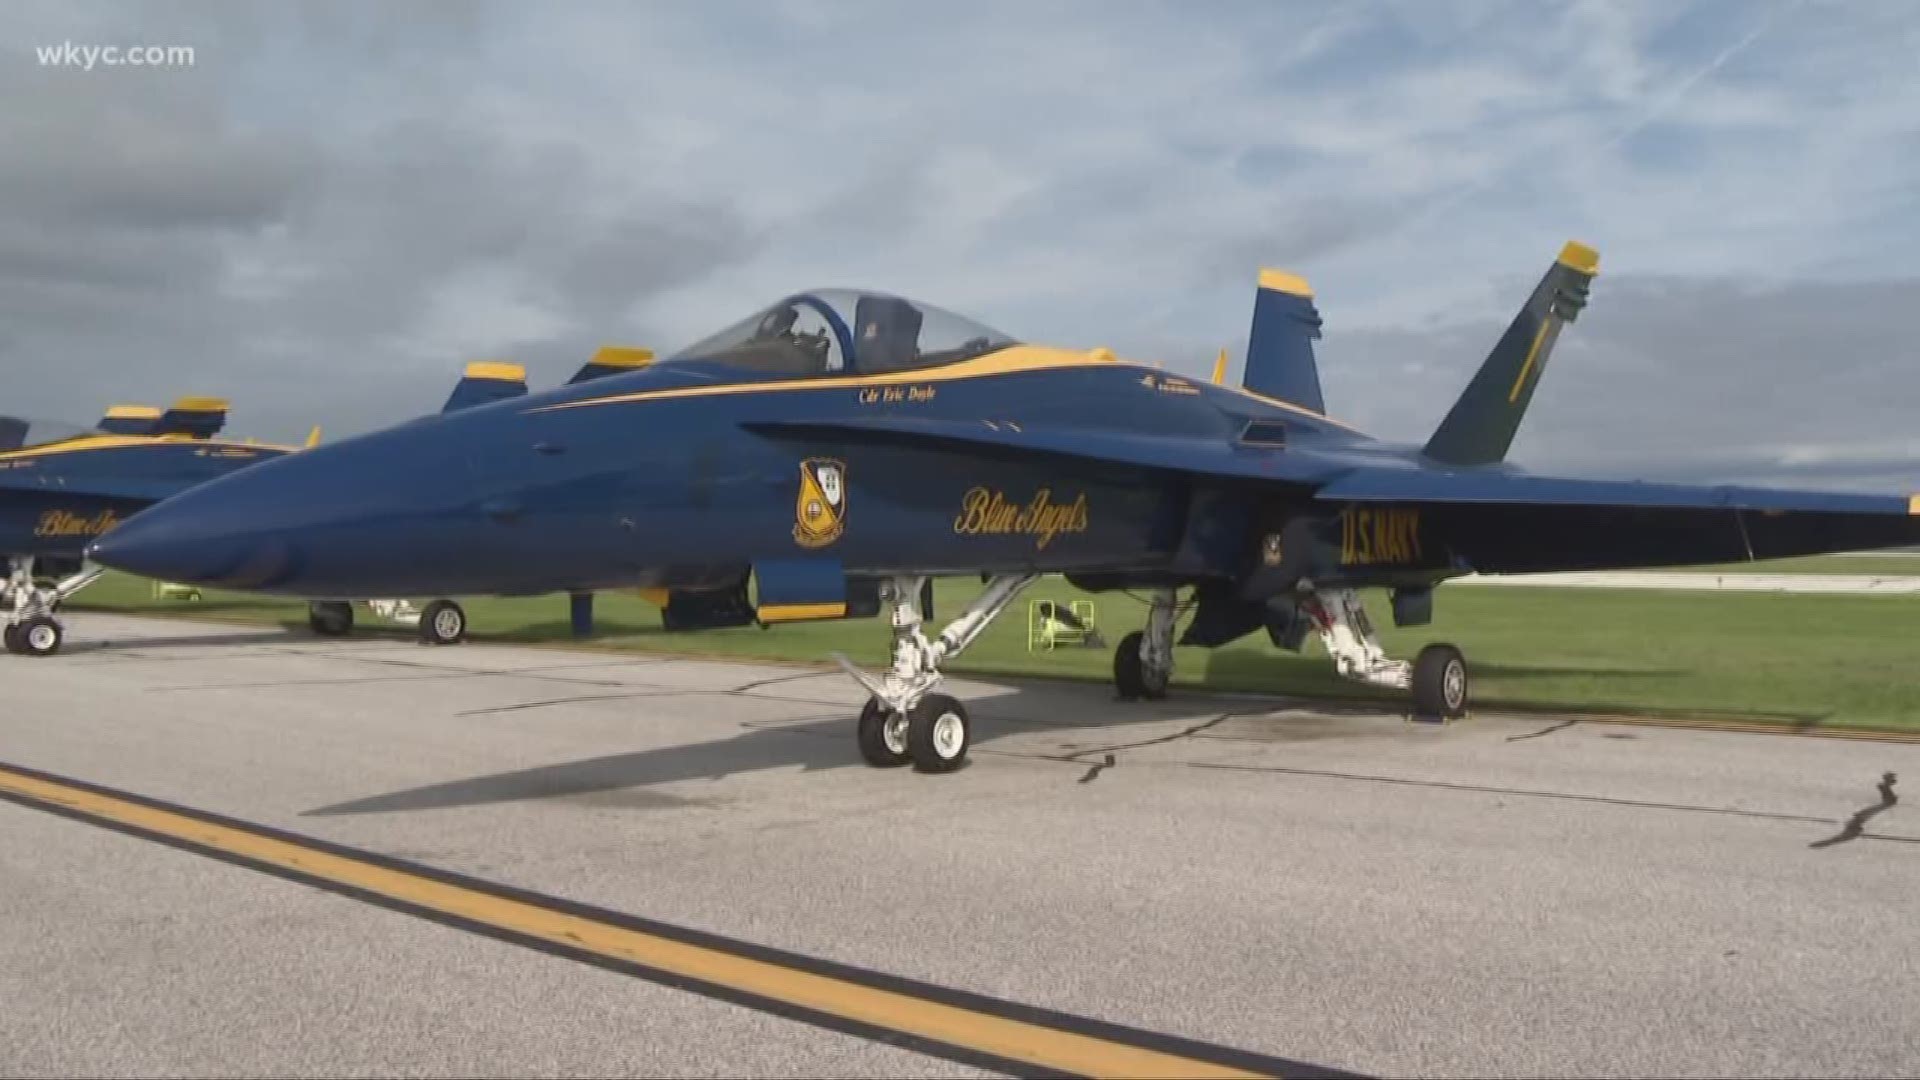 Where to buy tickets for the Cleveland National Air Show